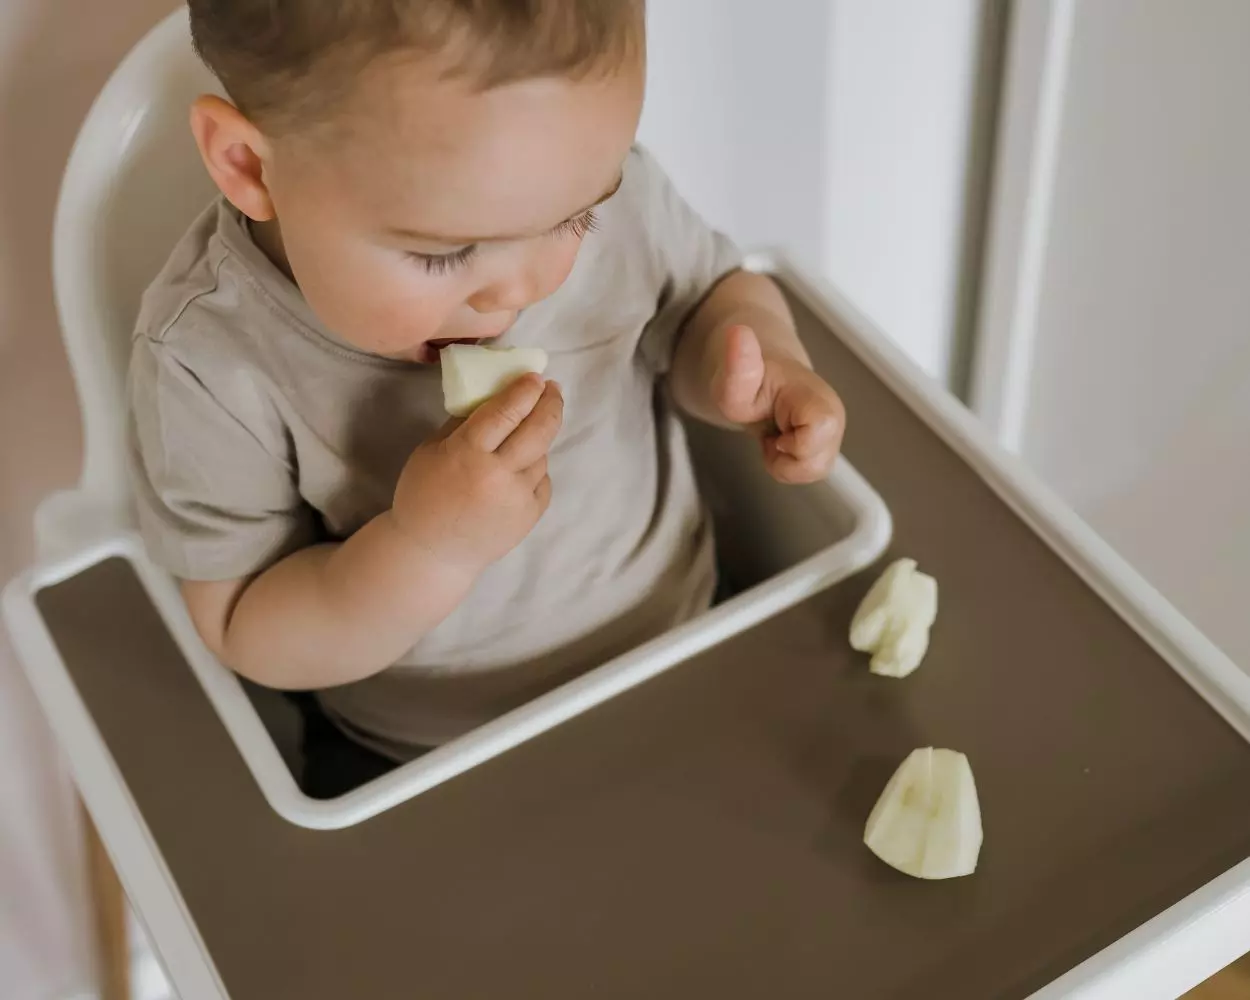 Complementary food for babies: tips from the experts